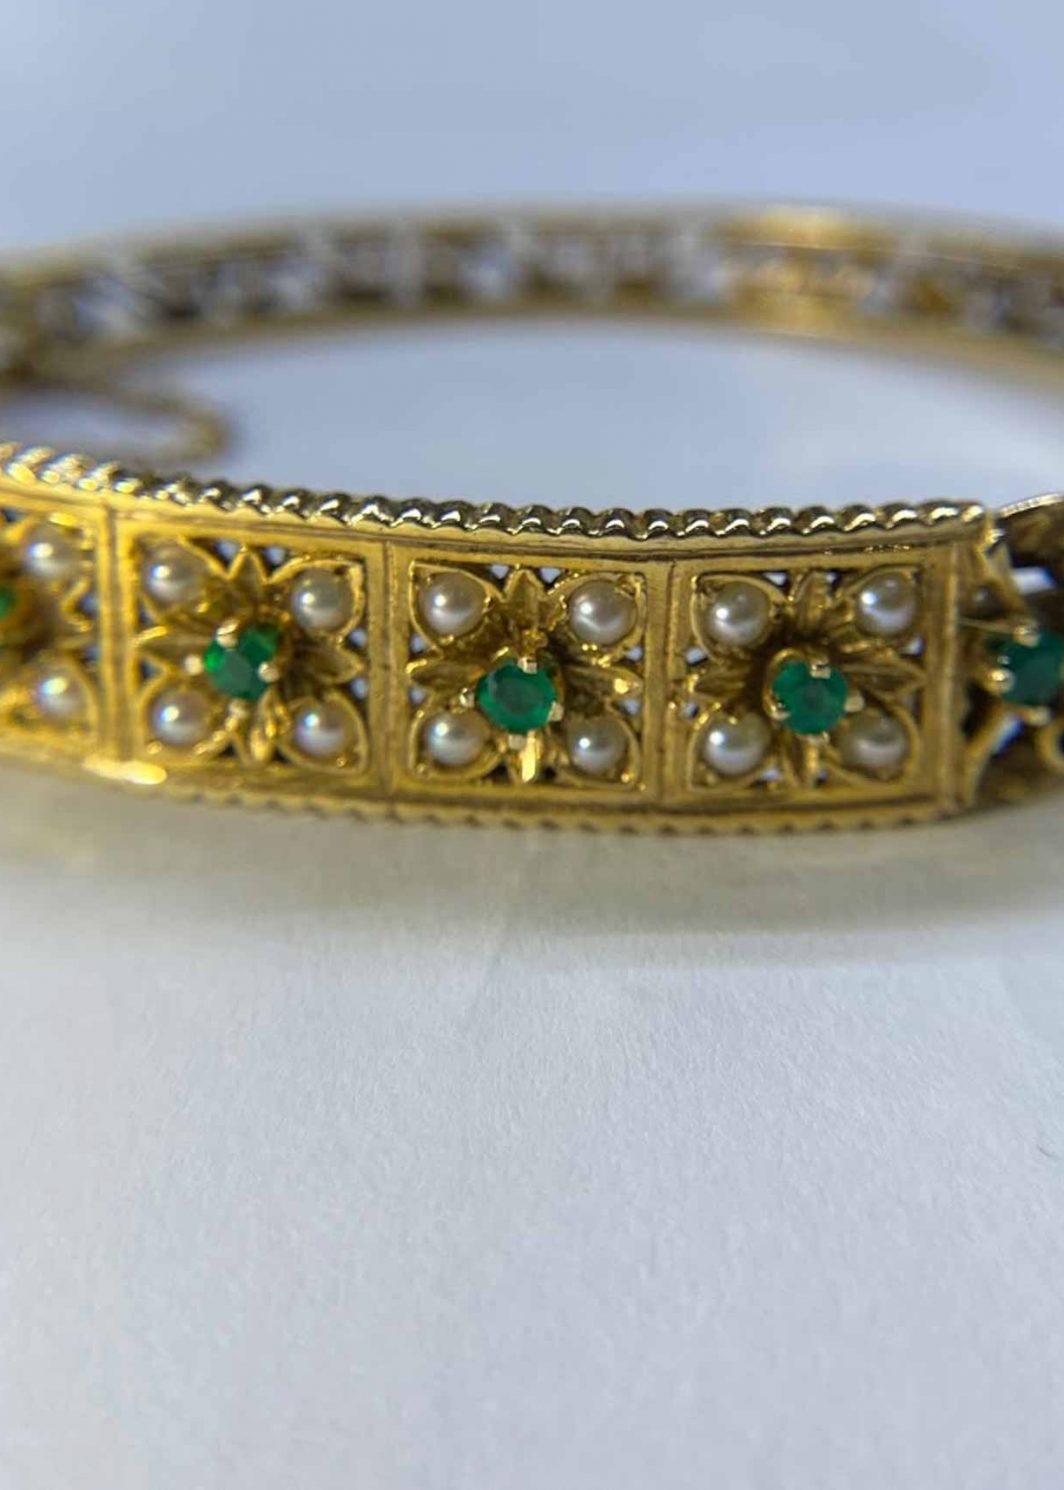 Antique Emerald and Pearl Bracelet